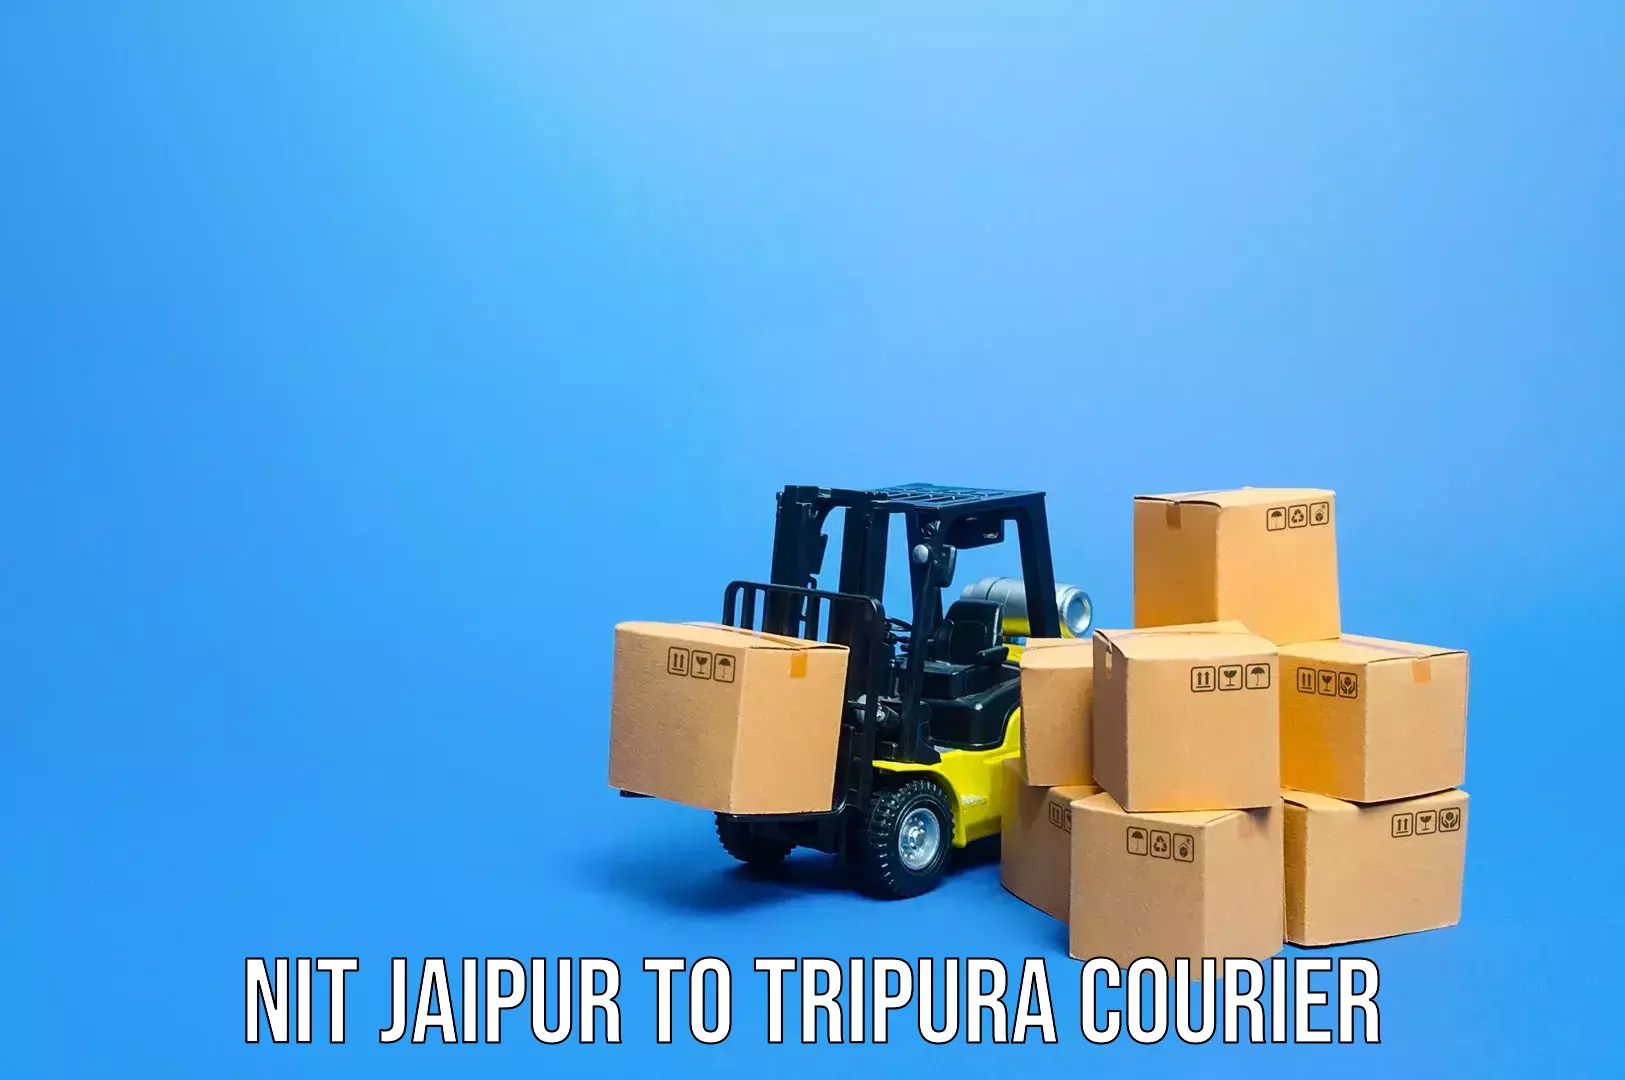 Luggage shipping specialists NIT Jaipur to Udaipur Tripura